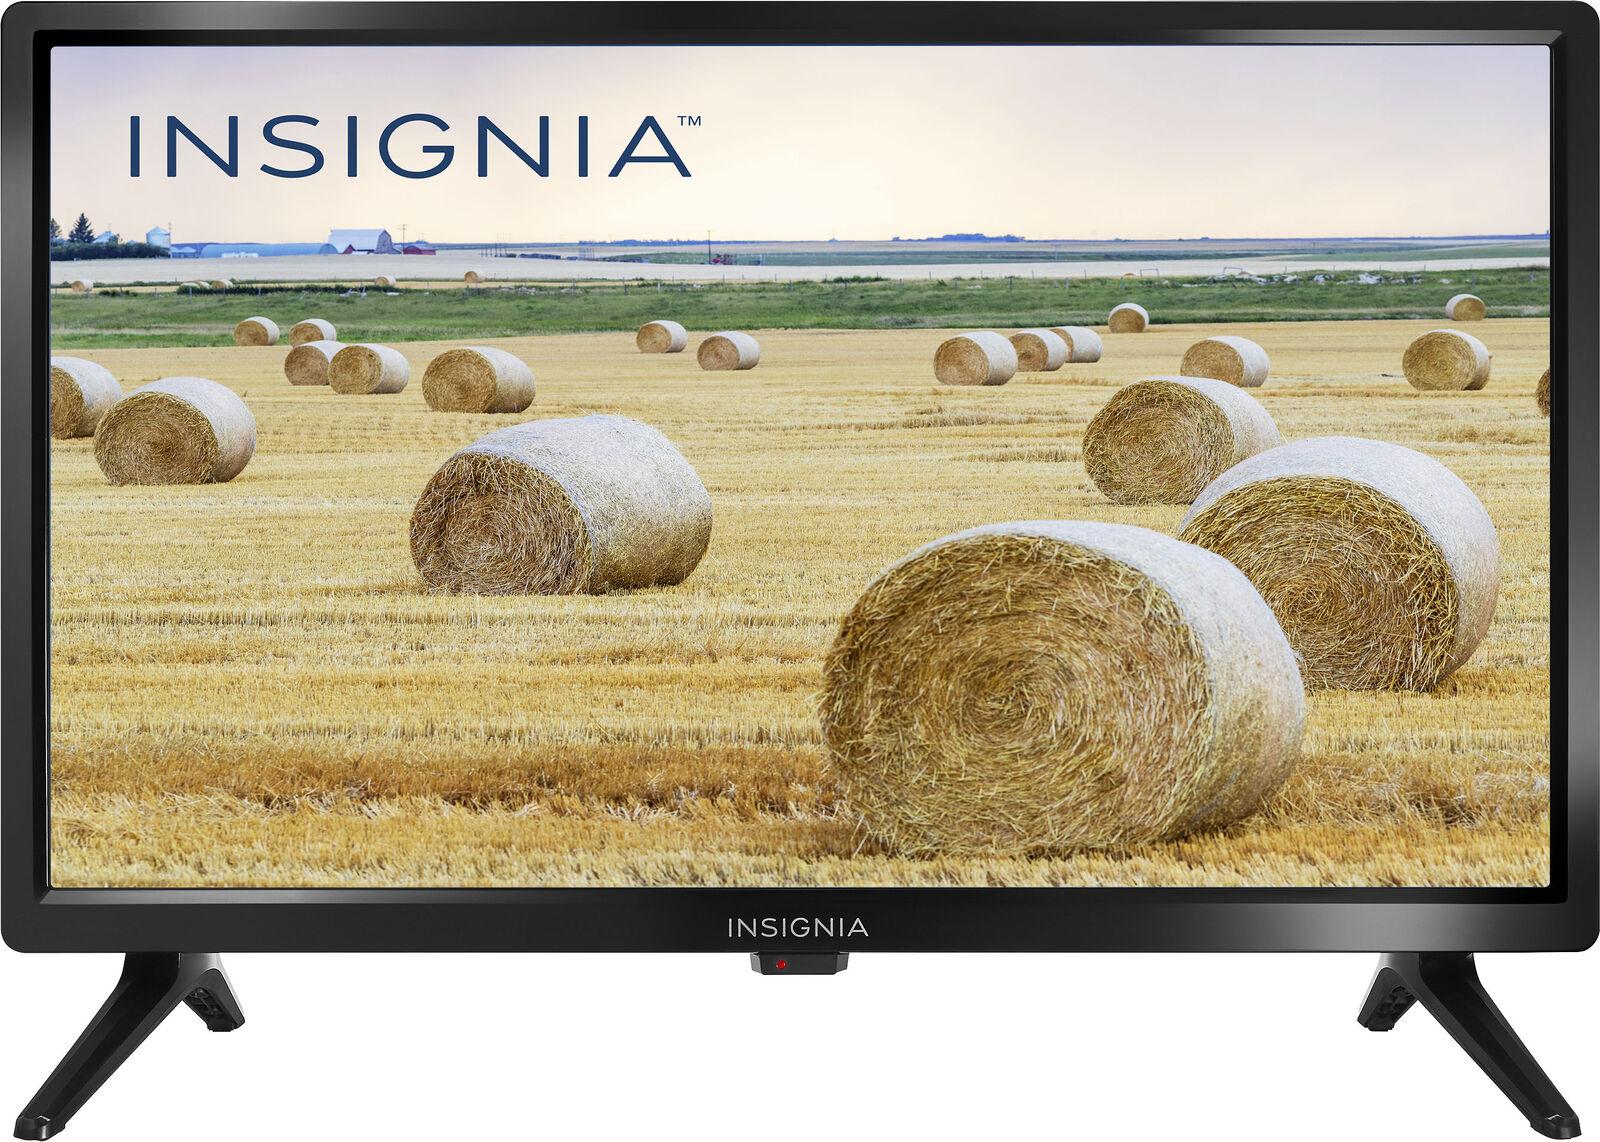 19in Insignia Class N10 Series LED 720p HD TV for $49.99 Shipped